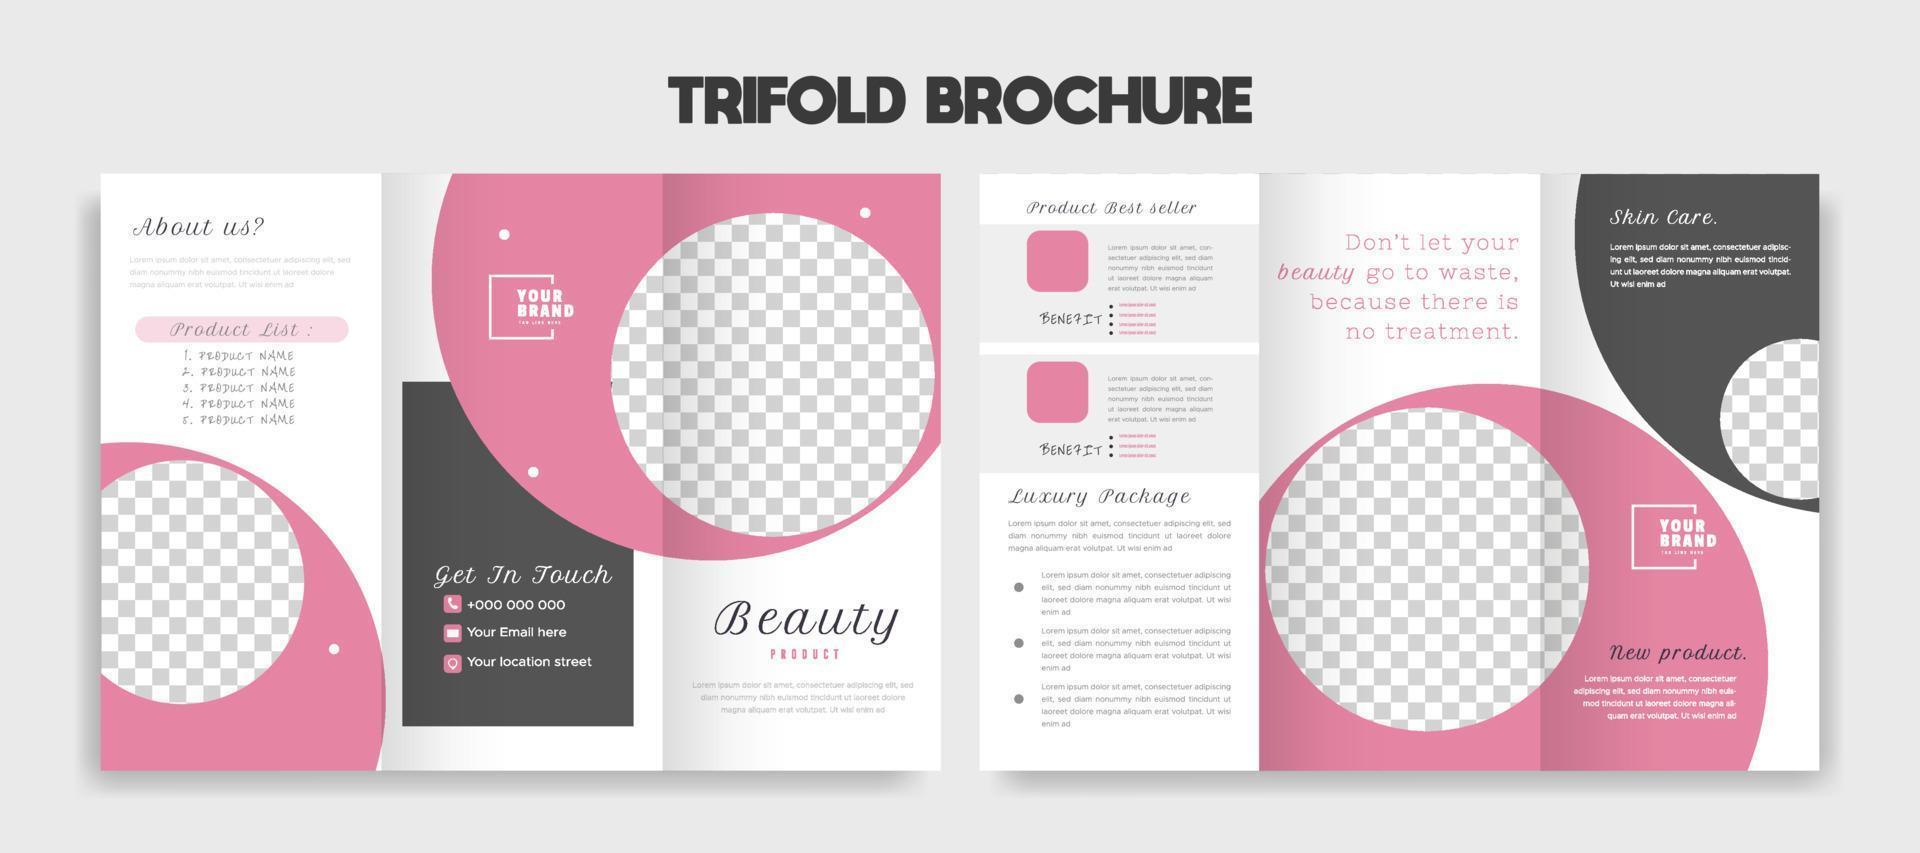 Simple and Elegant Trifold Brochure Layout vector